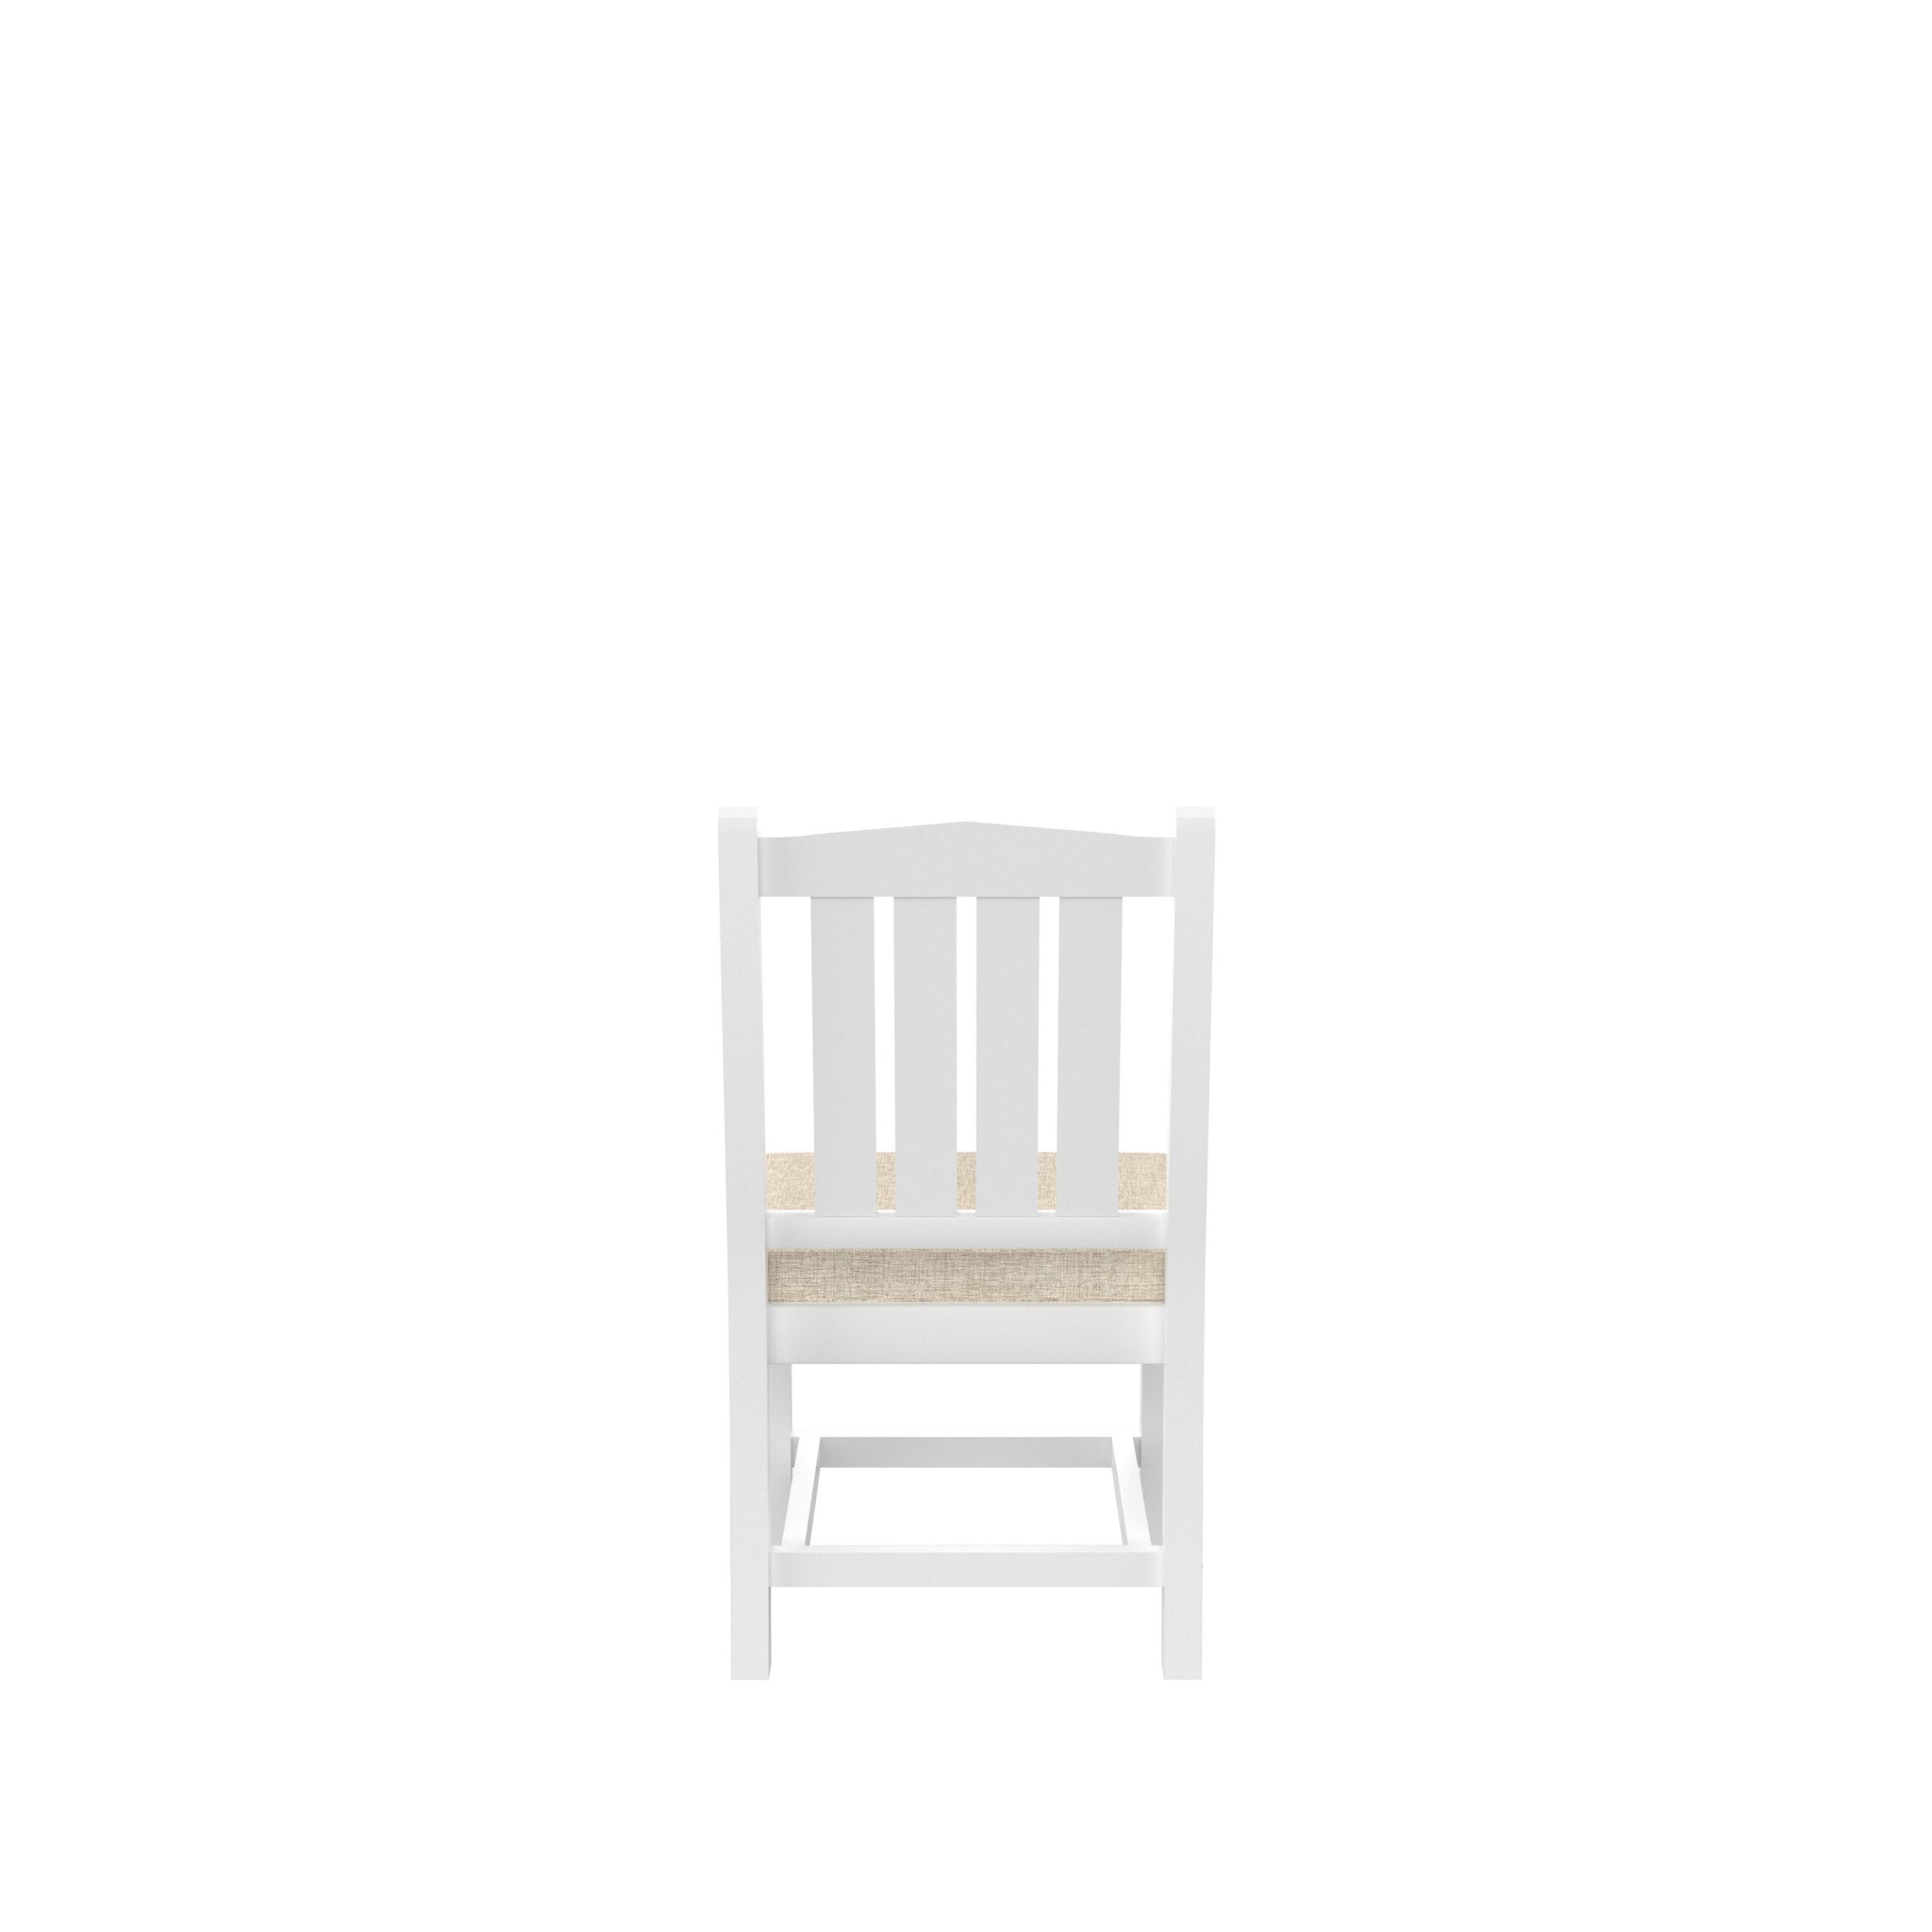 HDPE Dining Chair, White, With Cushion, No Armrest white-hdpe